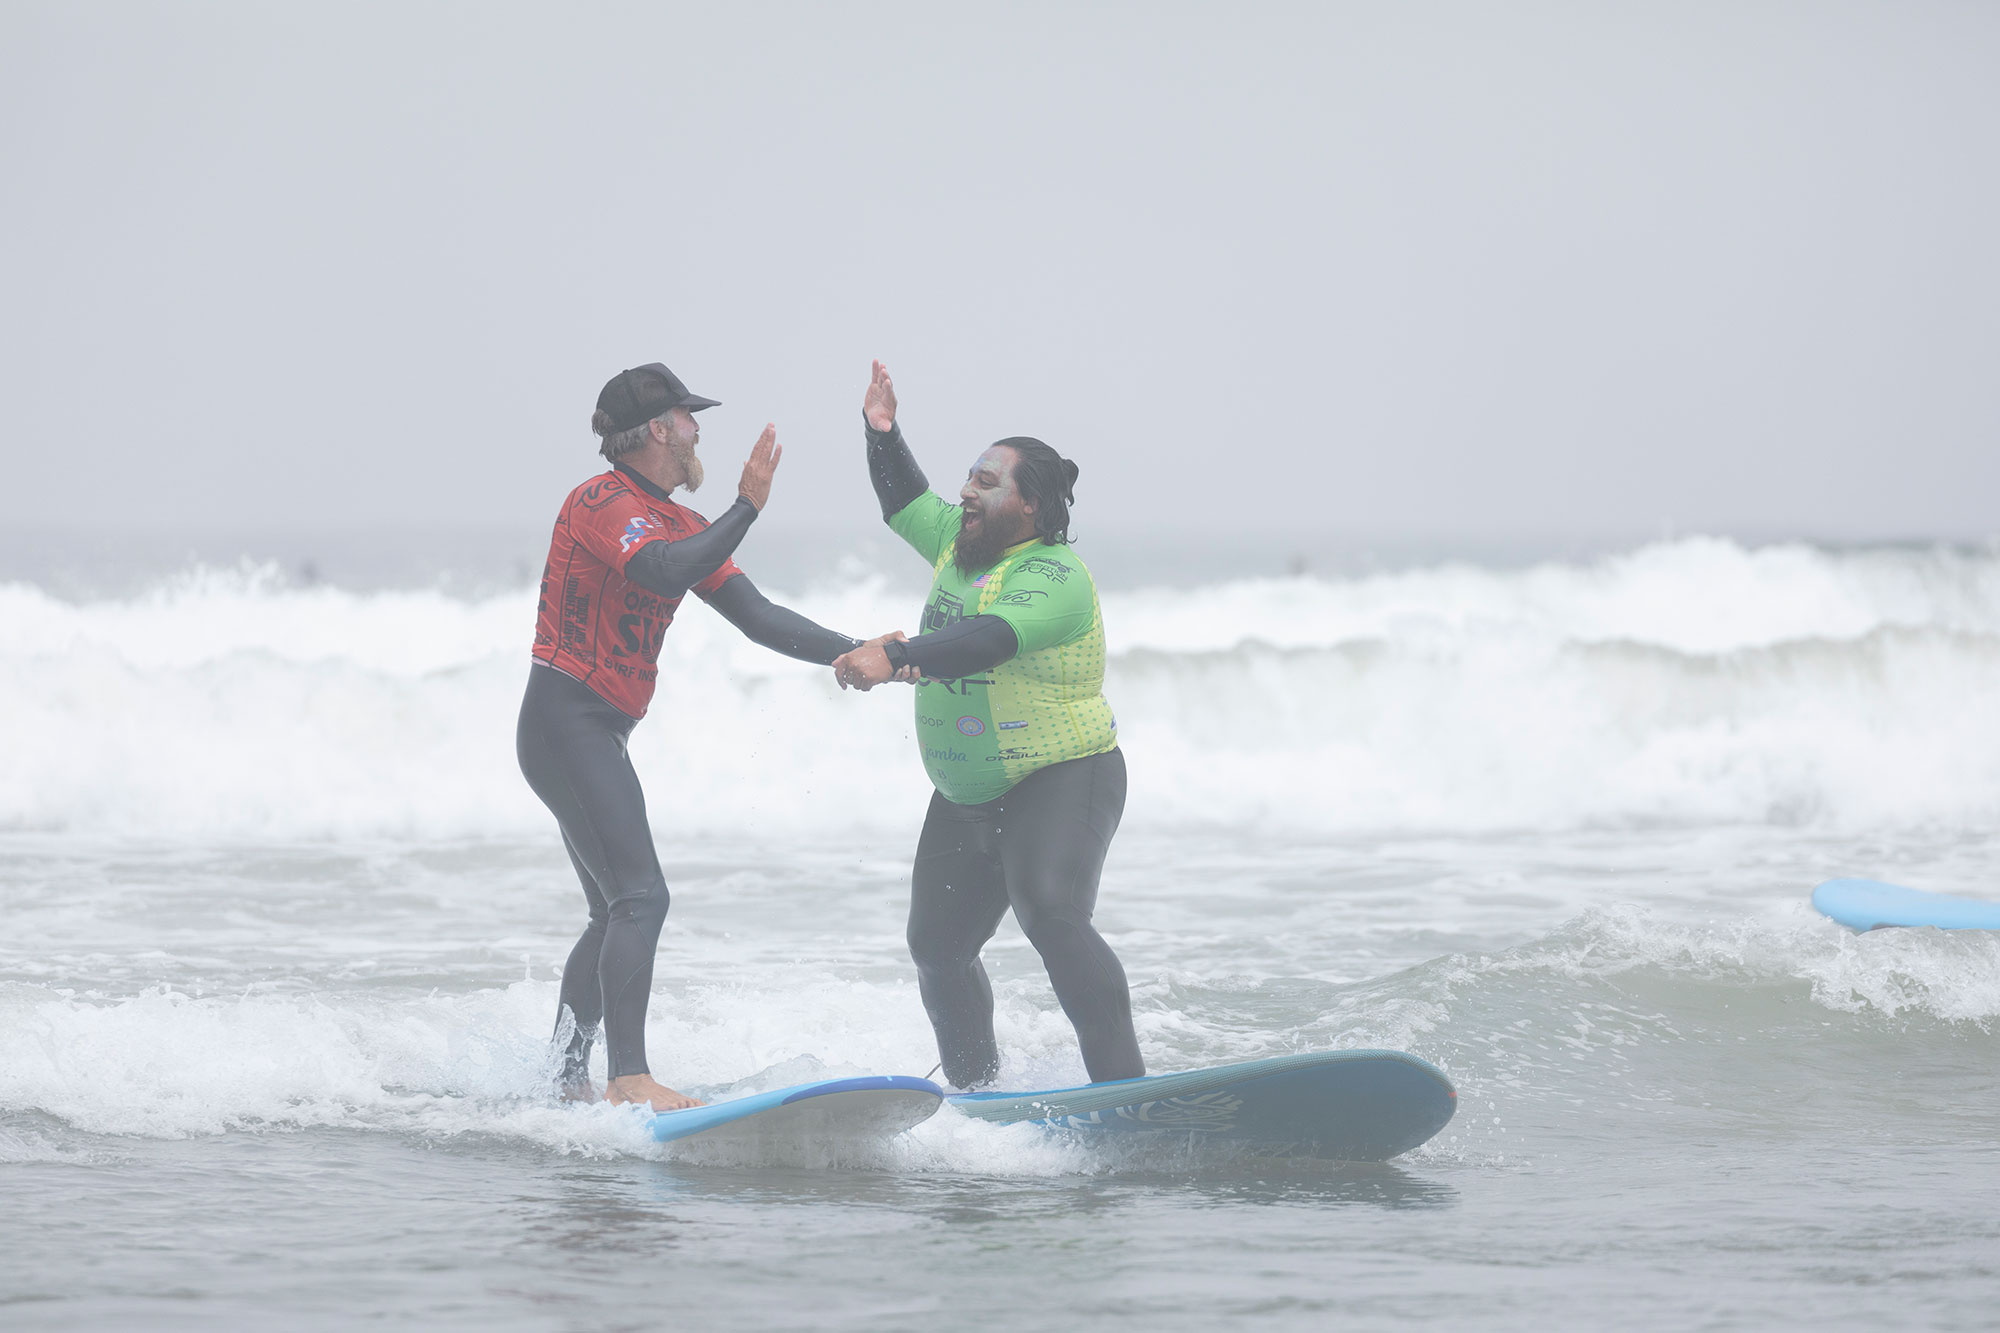 Billy, veteran, highfiving vet support while surfing with operation surf